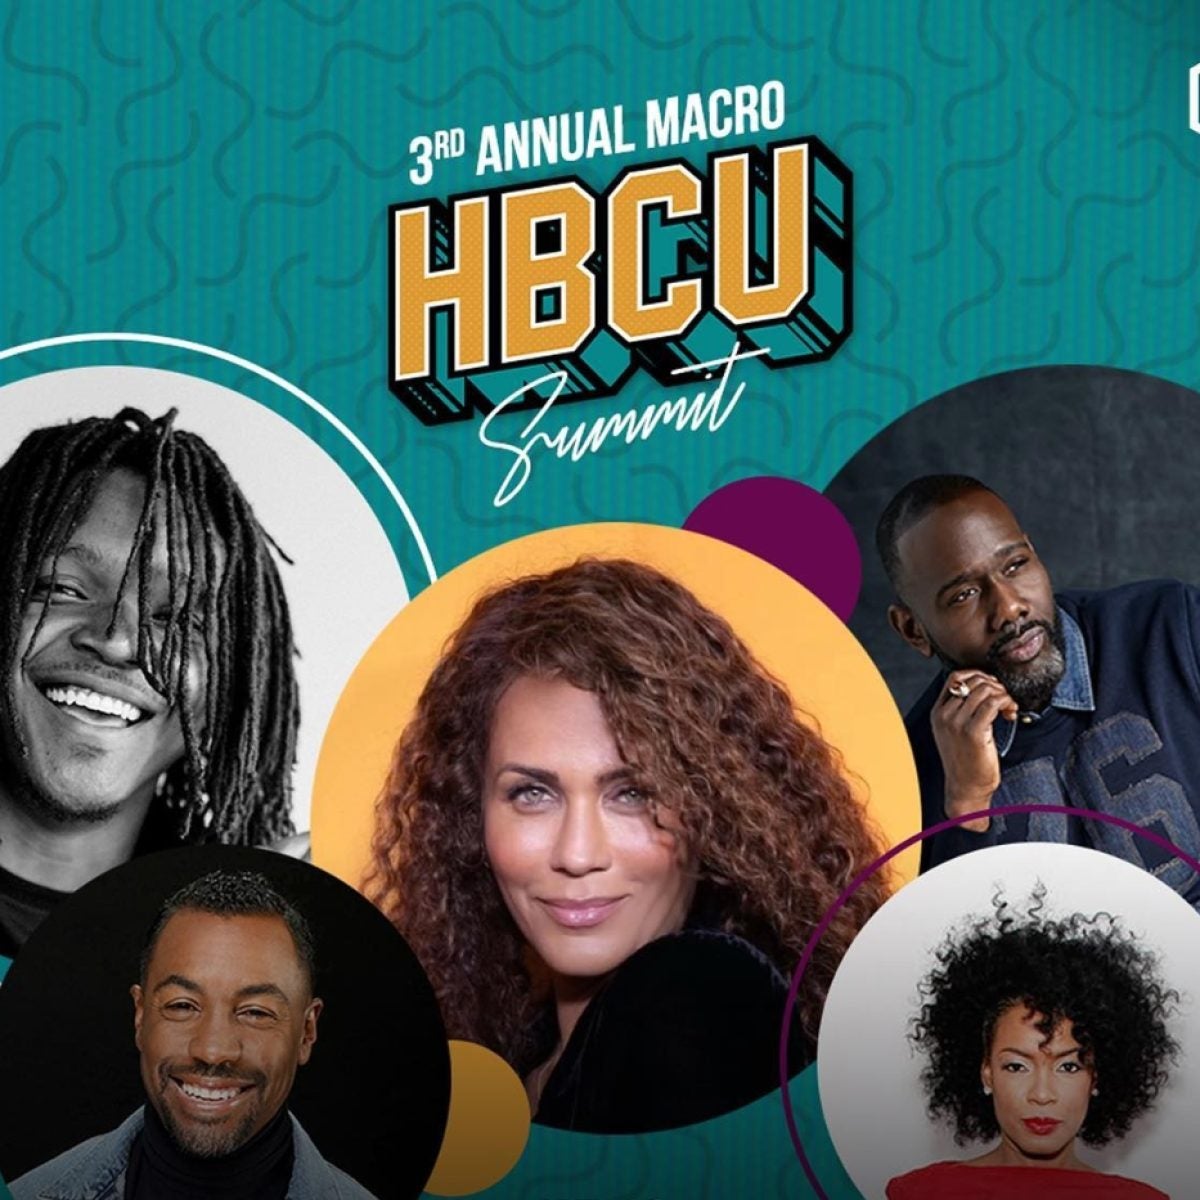 HBCU Students To Learn From Celebs And Execs At 3rd Annual Macro X HBCU Entertainment Summit